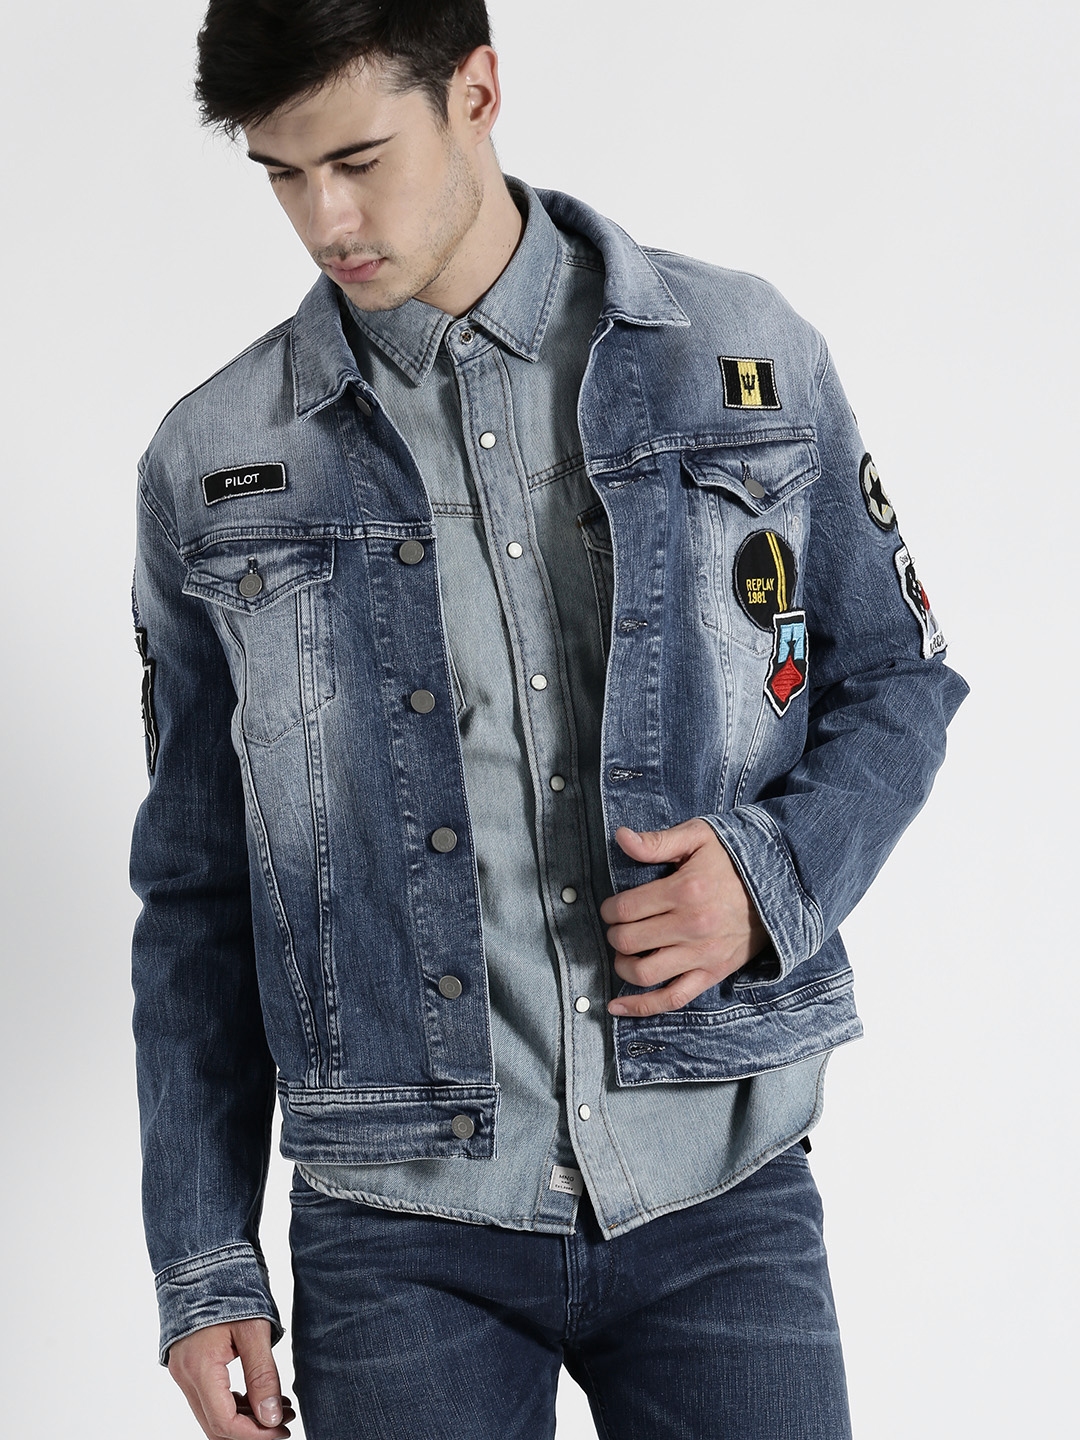 replay blue jeans jacket